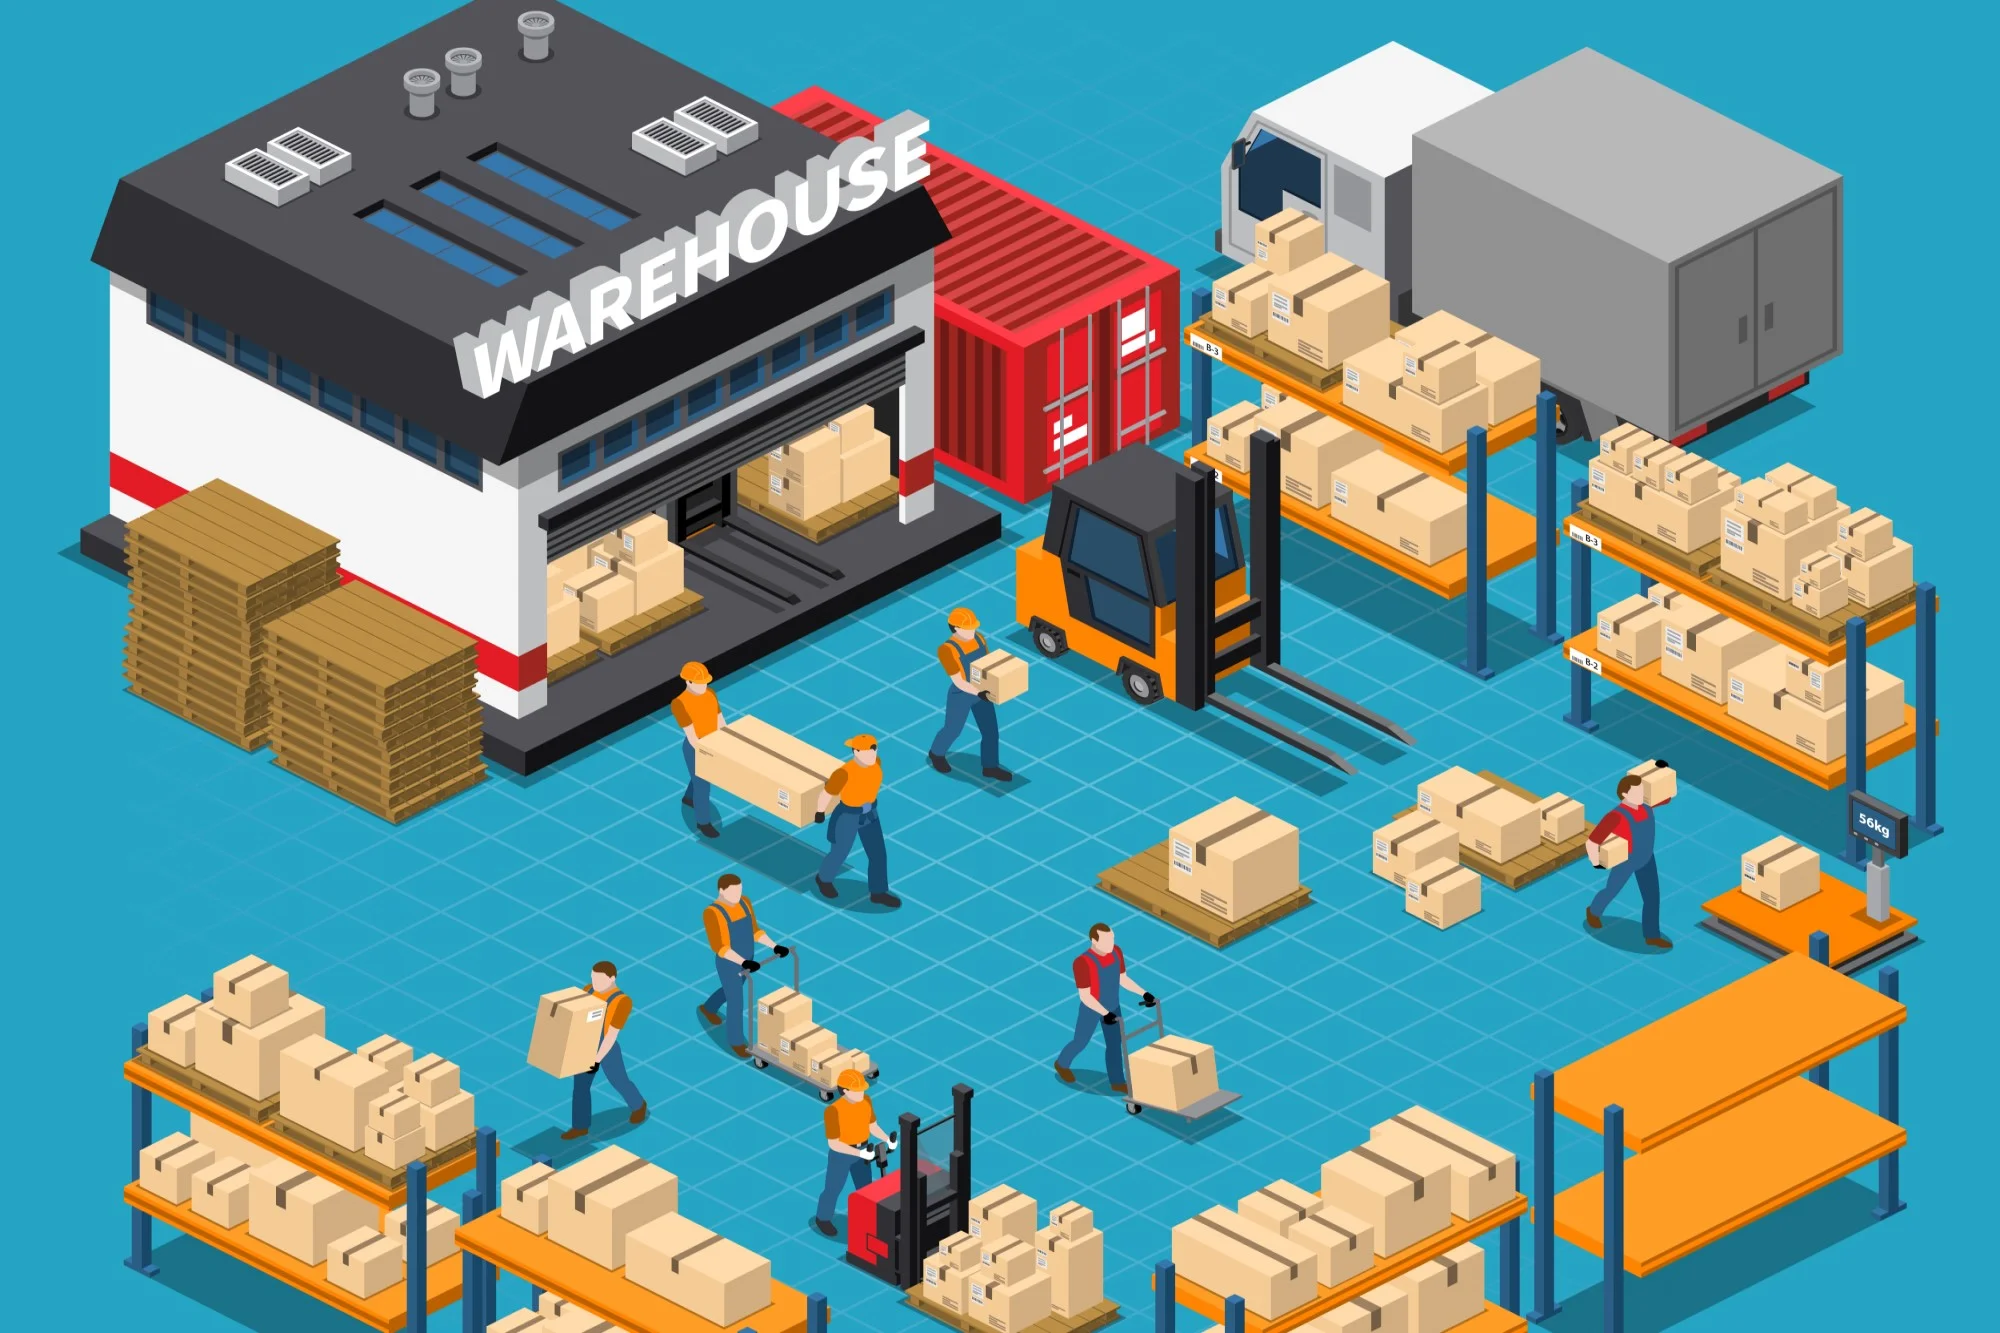 Warehouse/Inventory Software